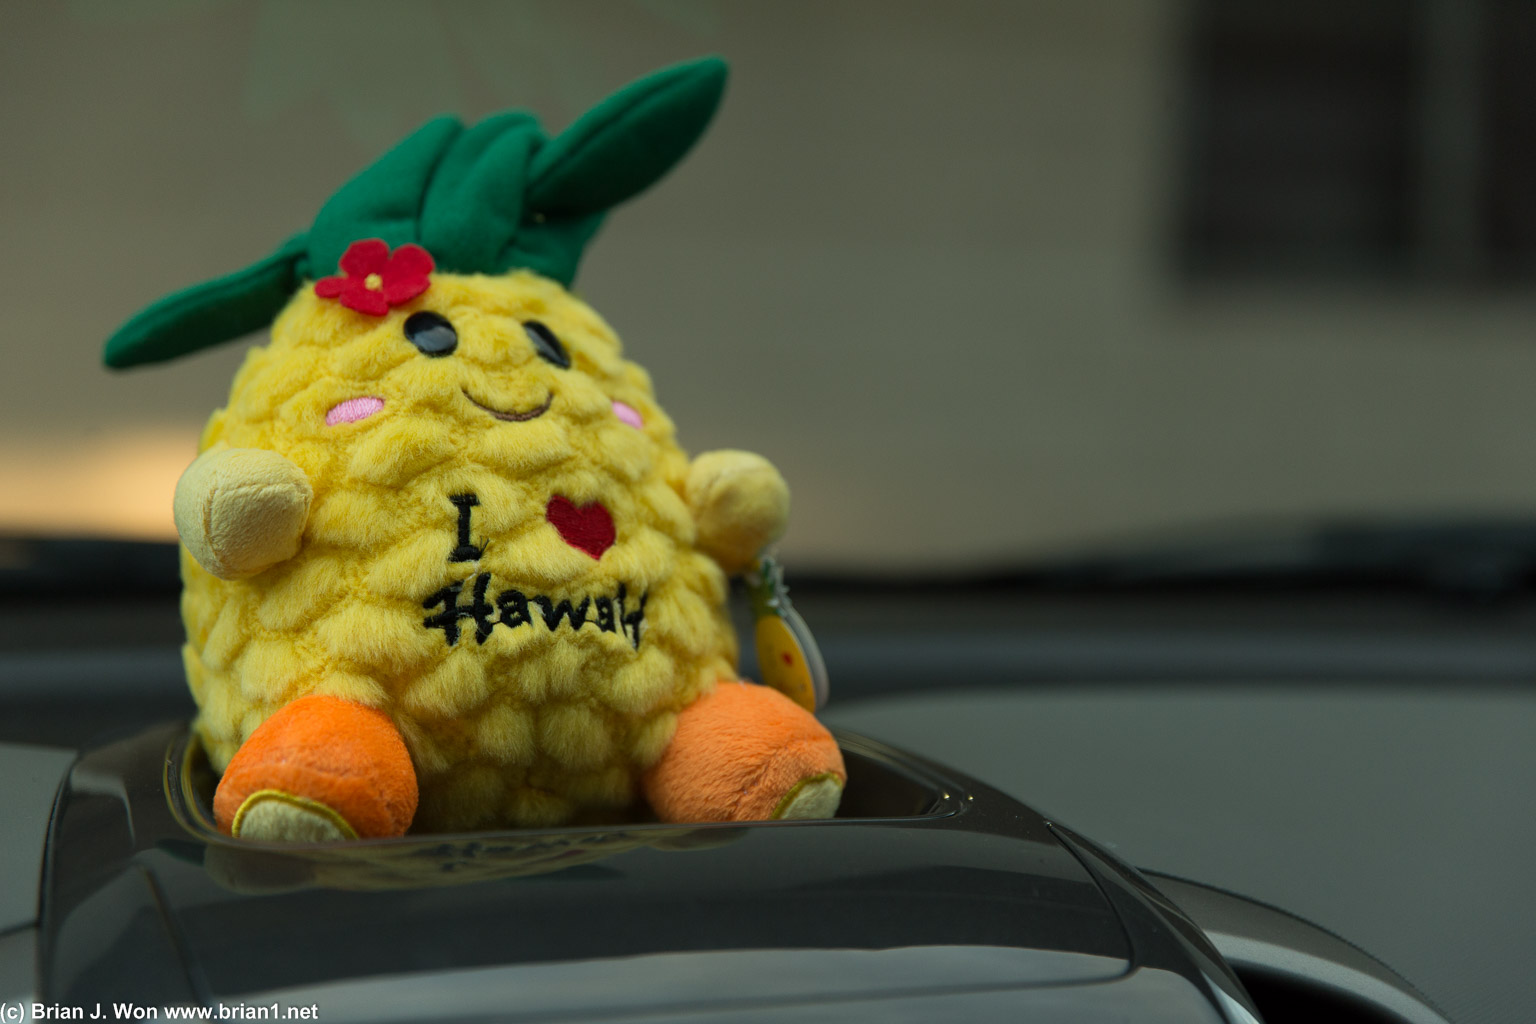 I <3 Hawaii on a pineapple, of course.